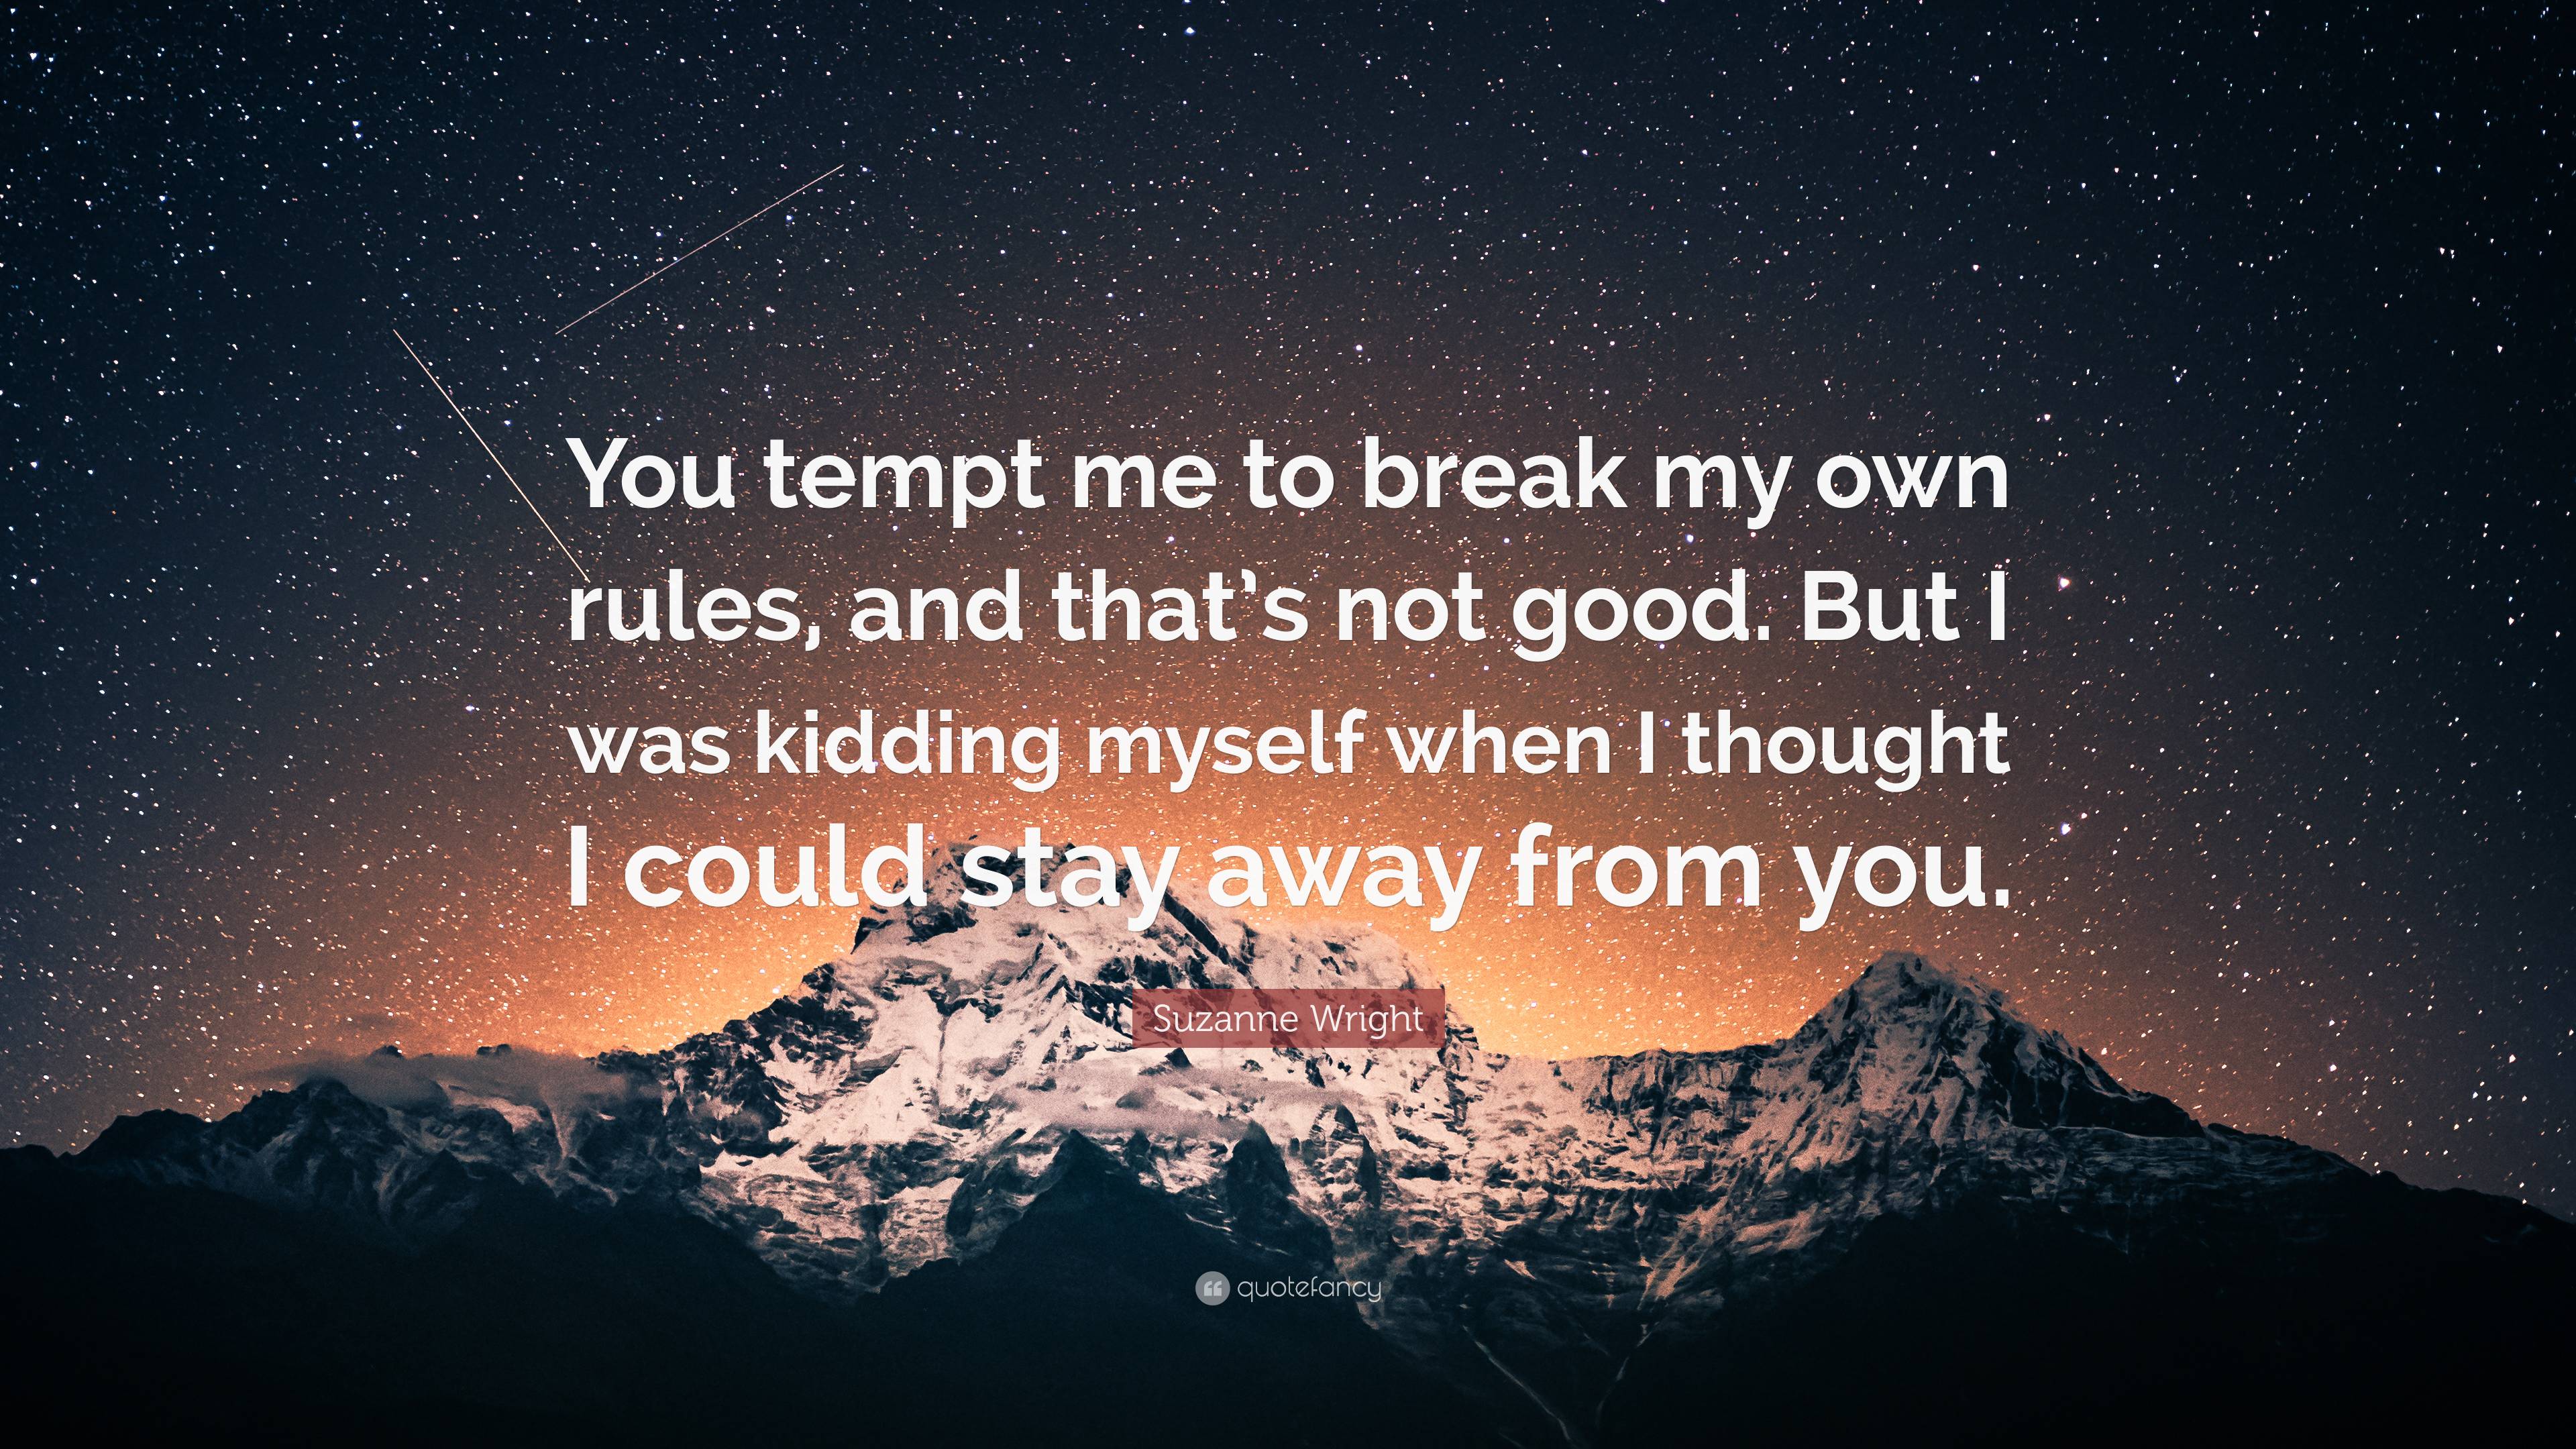 https://quotefancy.com/media/wallpaper/3840x2160/7550374-Suzanne-Wright-Quote-You-tempt-me-to-break-my-own-rules-and-that-s.jpg